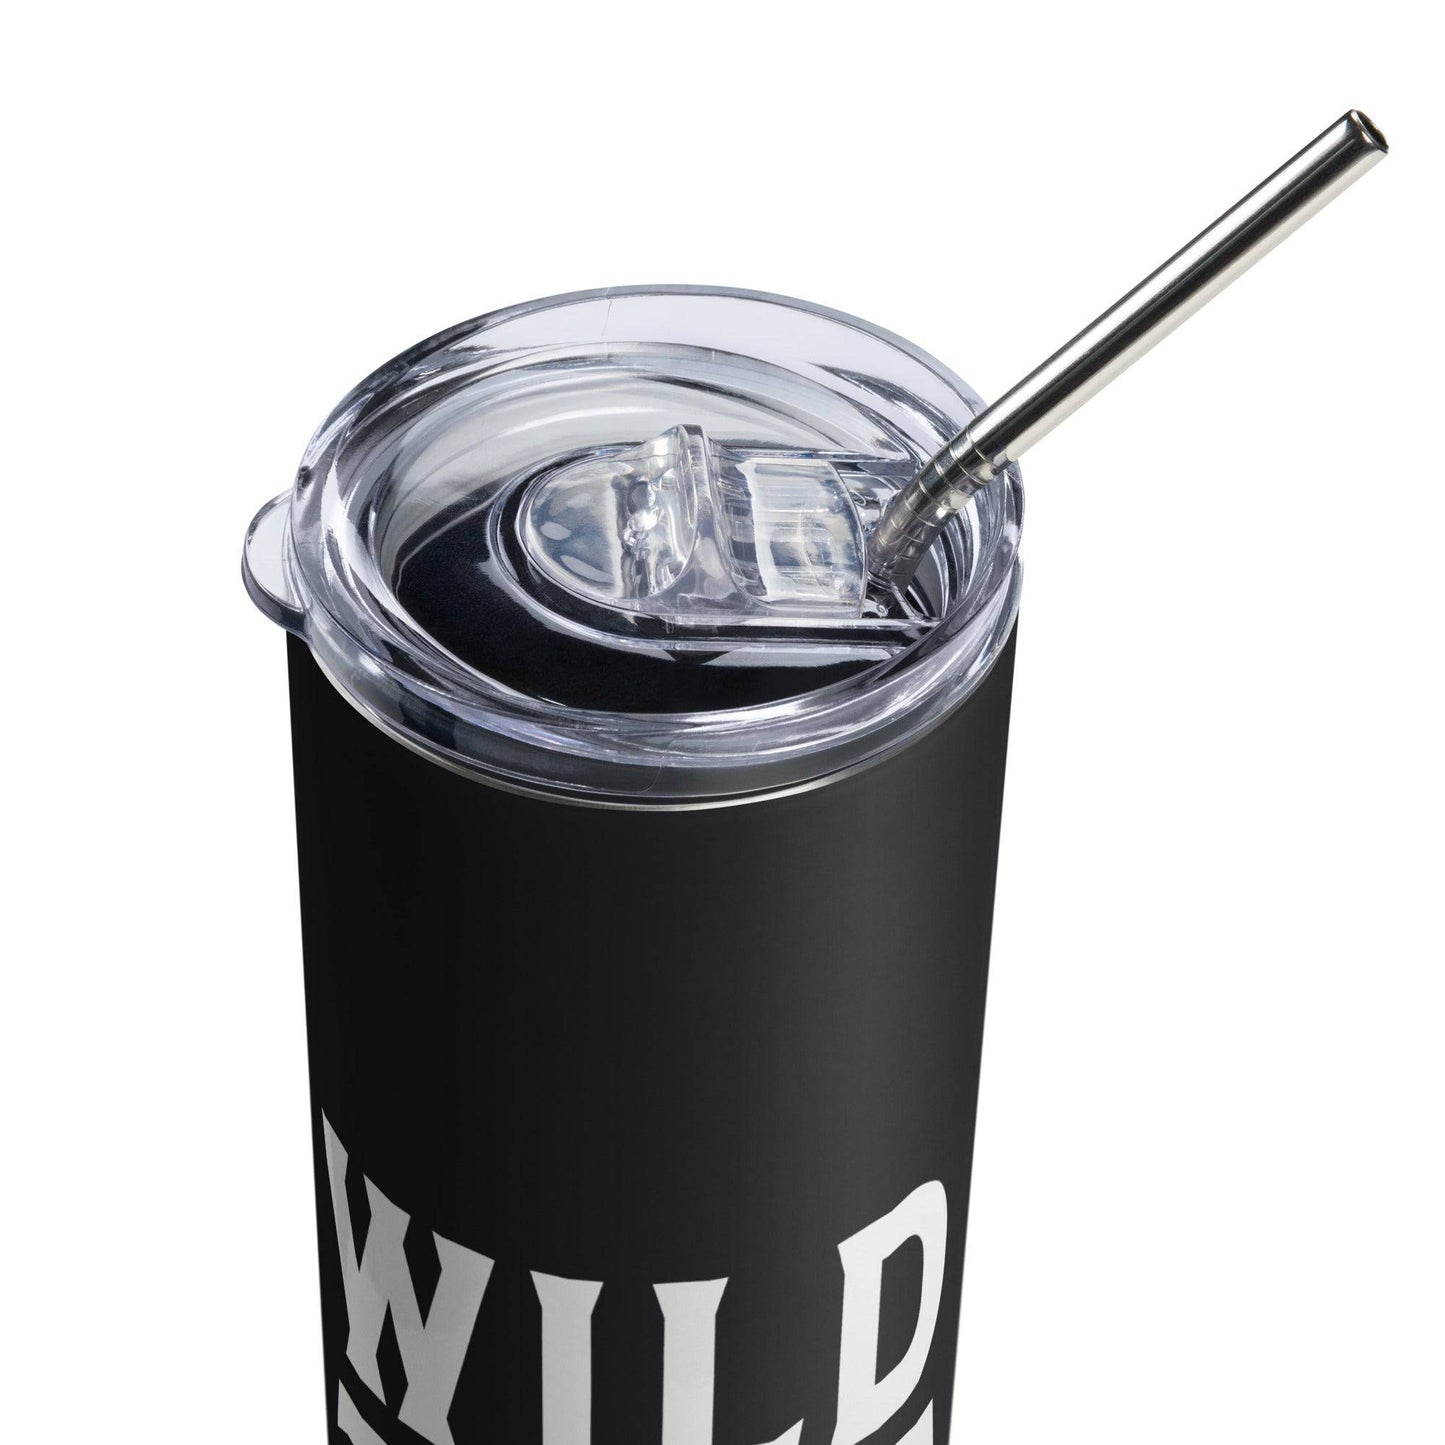 Wild Tide Seafoods Stainless steel tumbler - Wild Tide Seafoods